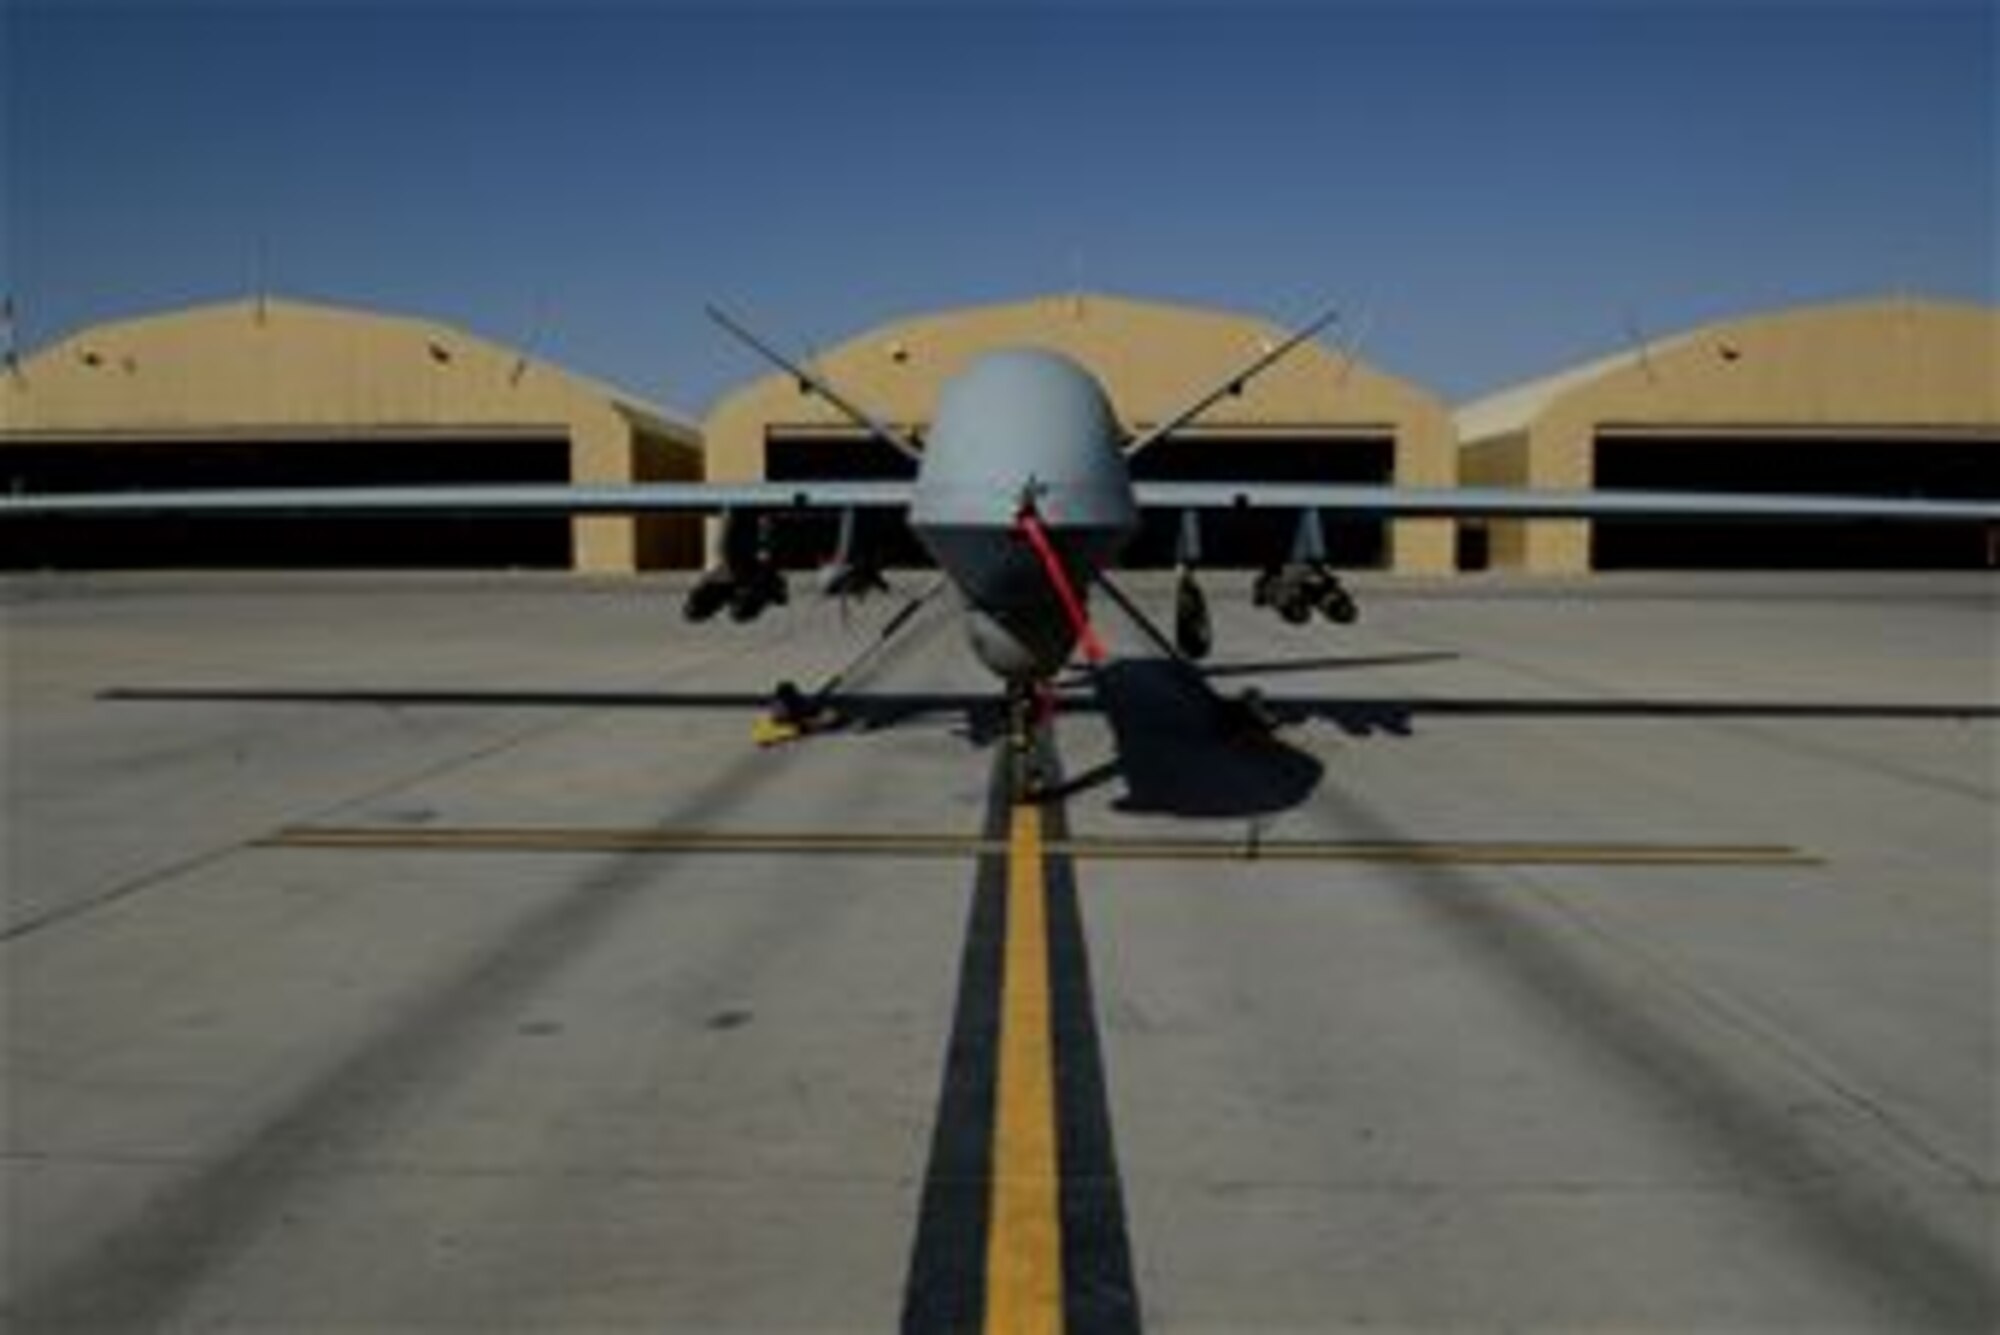 An MQ-9 Reaper with the 62nd Expeditionary Reconnaissance Squadron sits on a ramp Aug. 18, 2014, at Kandahar Airfield, Afghanistan. The Reaper is launched, recovered and maintained here. It is remotely piloted by pilots in bases located in the U.S. (U.S. Air Force photo/Staff Sgt. Evelyn Chavez)